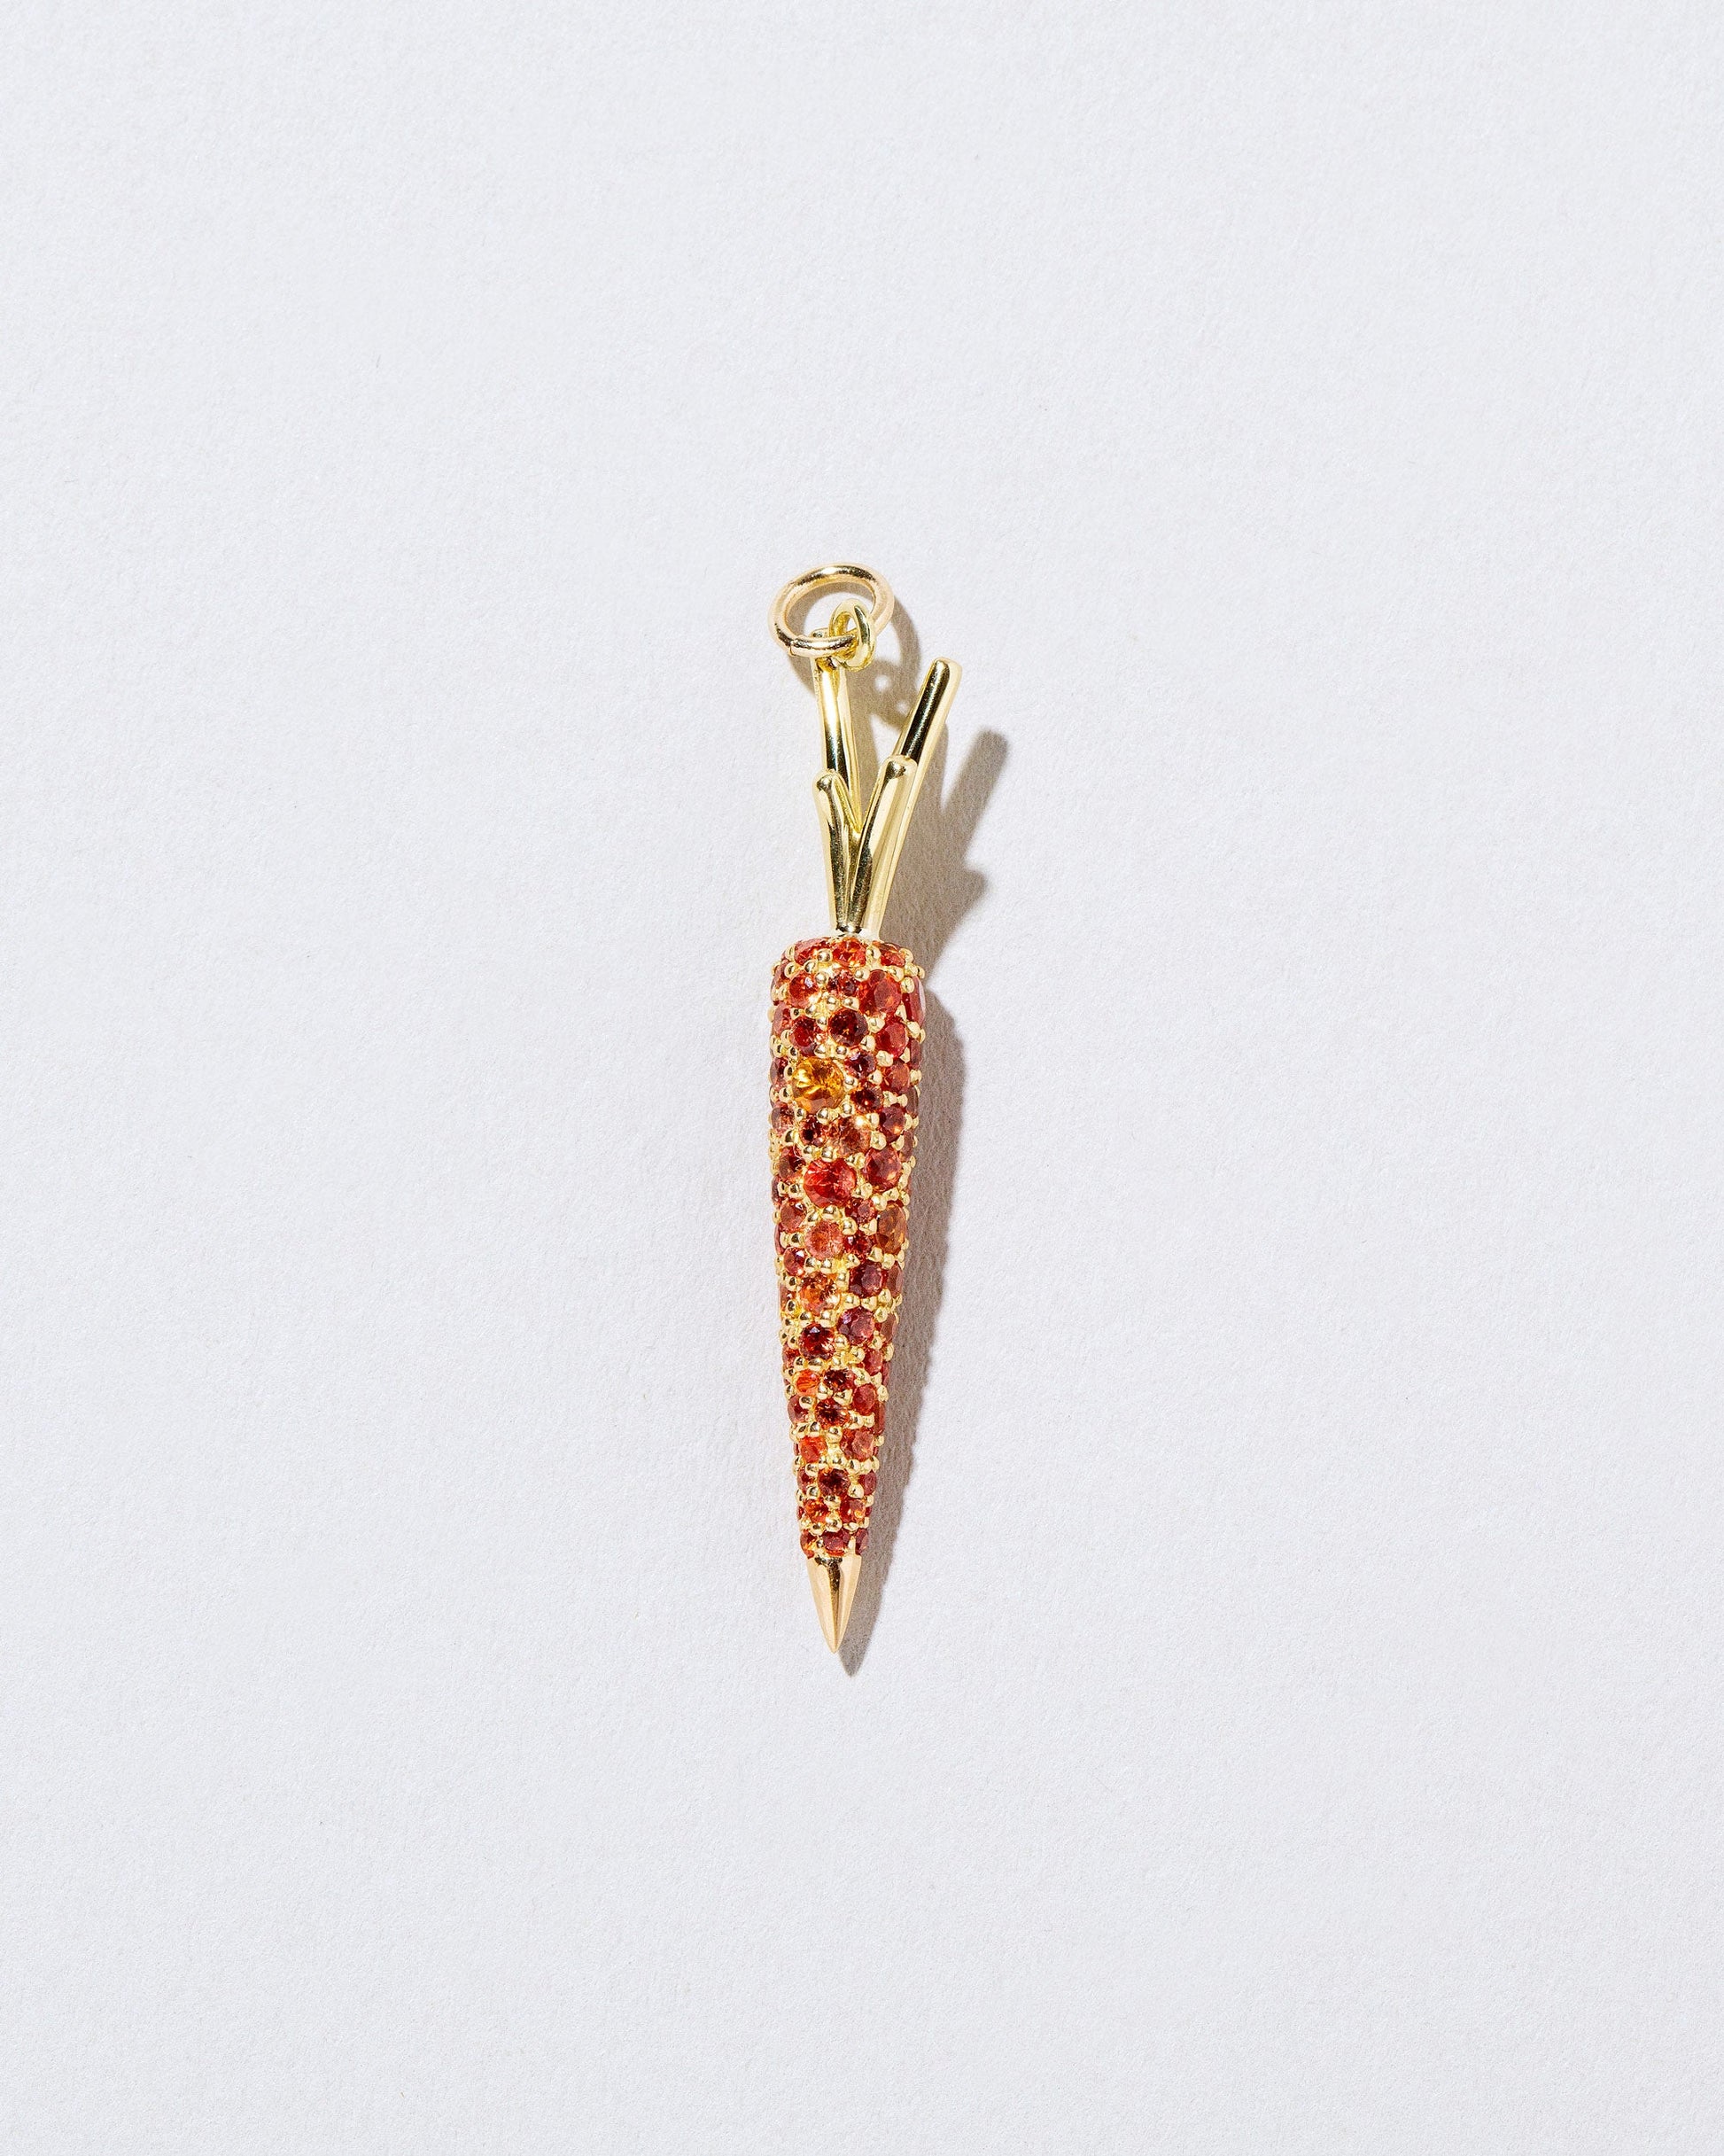  Carrot Charm on light color background.